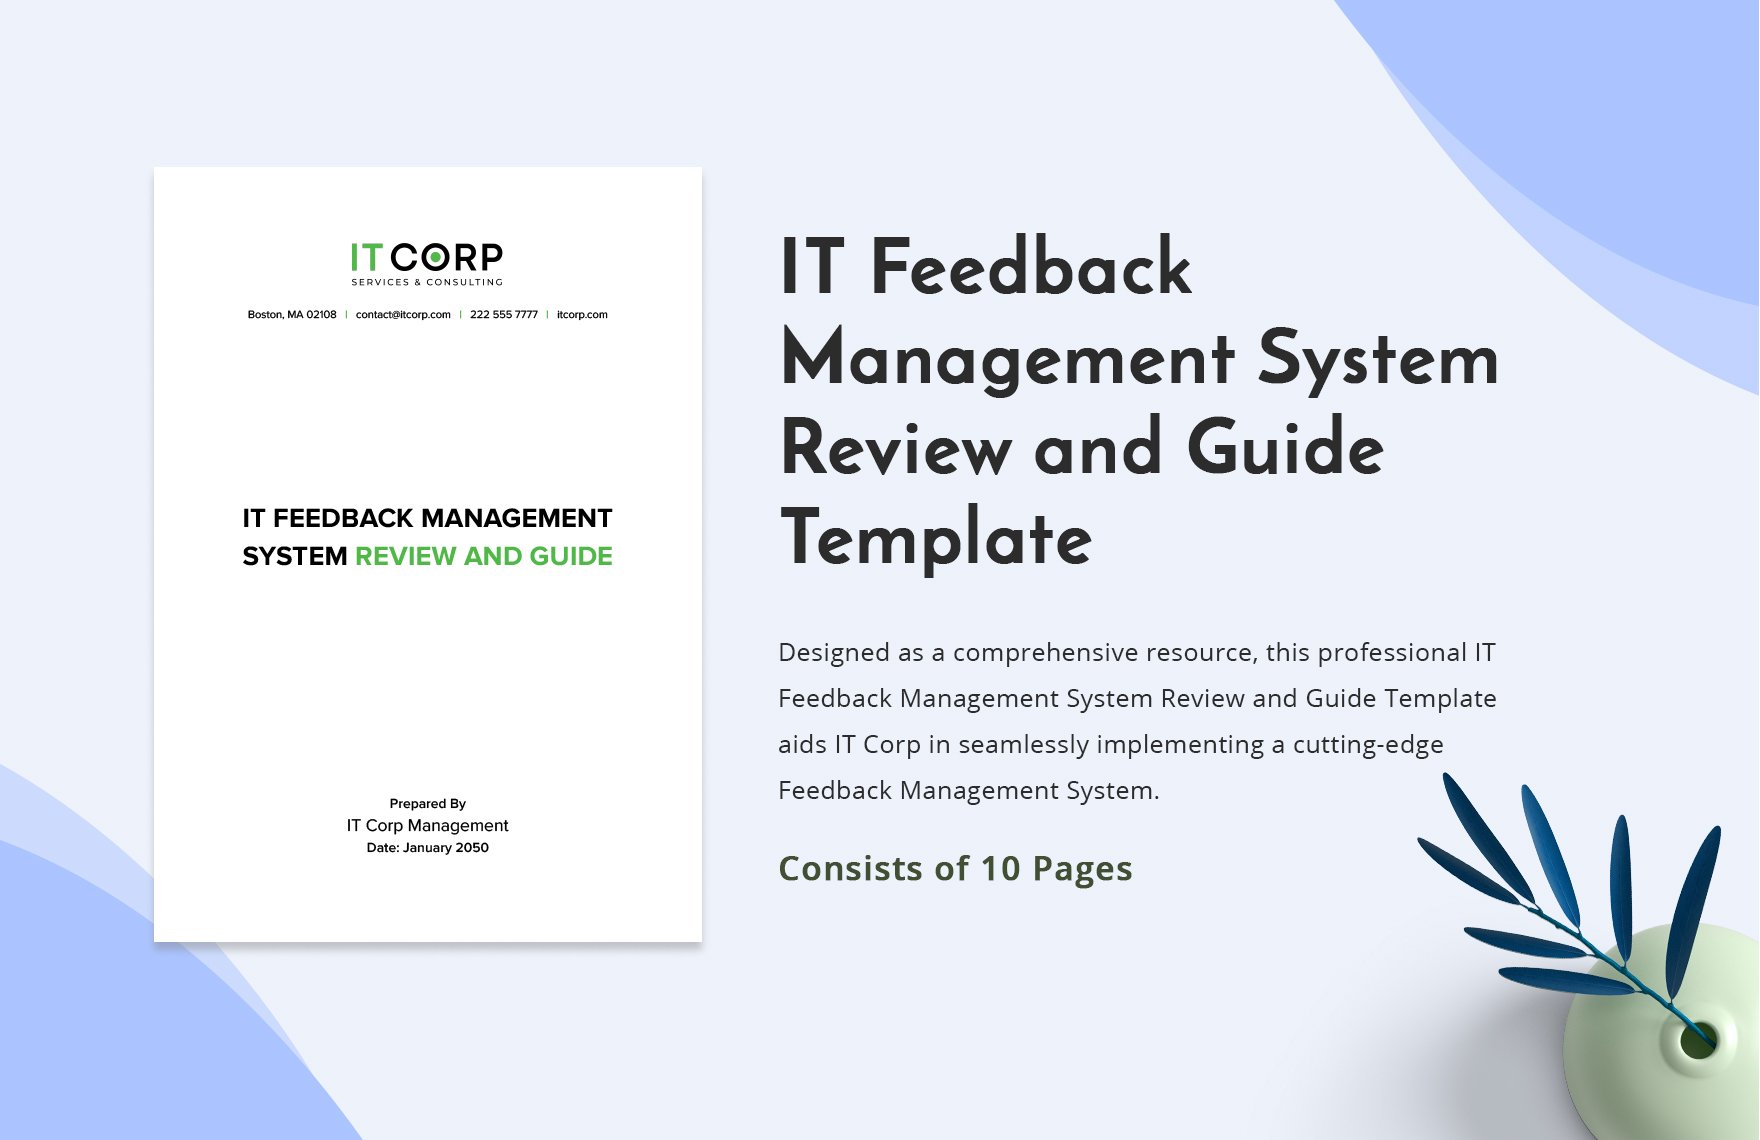 IT Feedback Management System Review and Guide Template